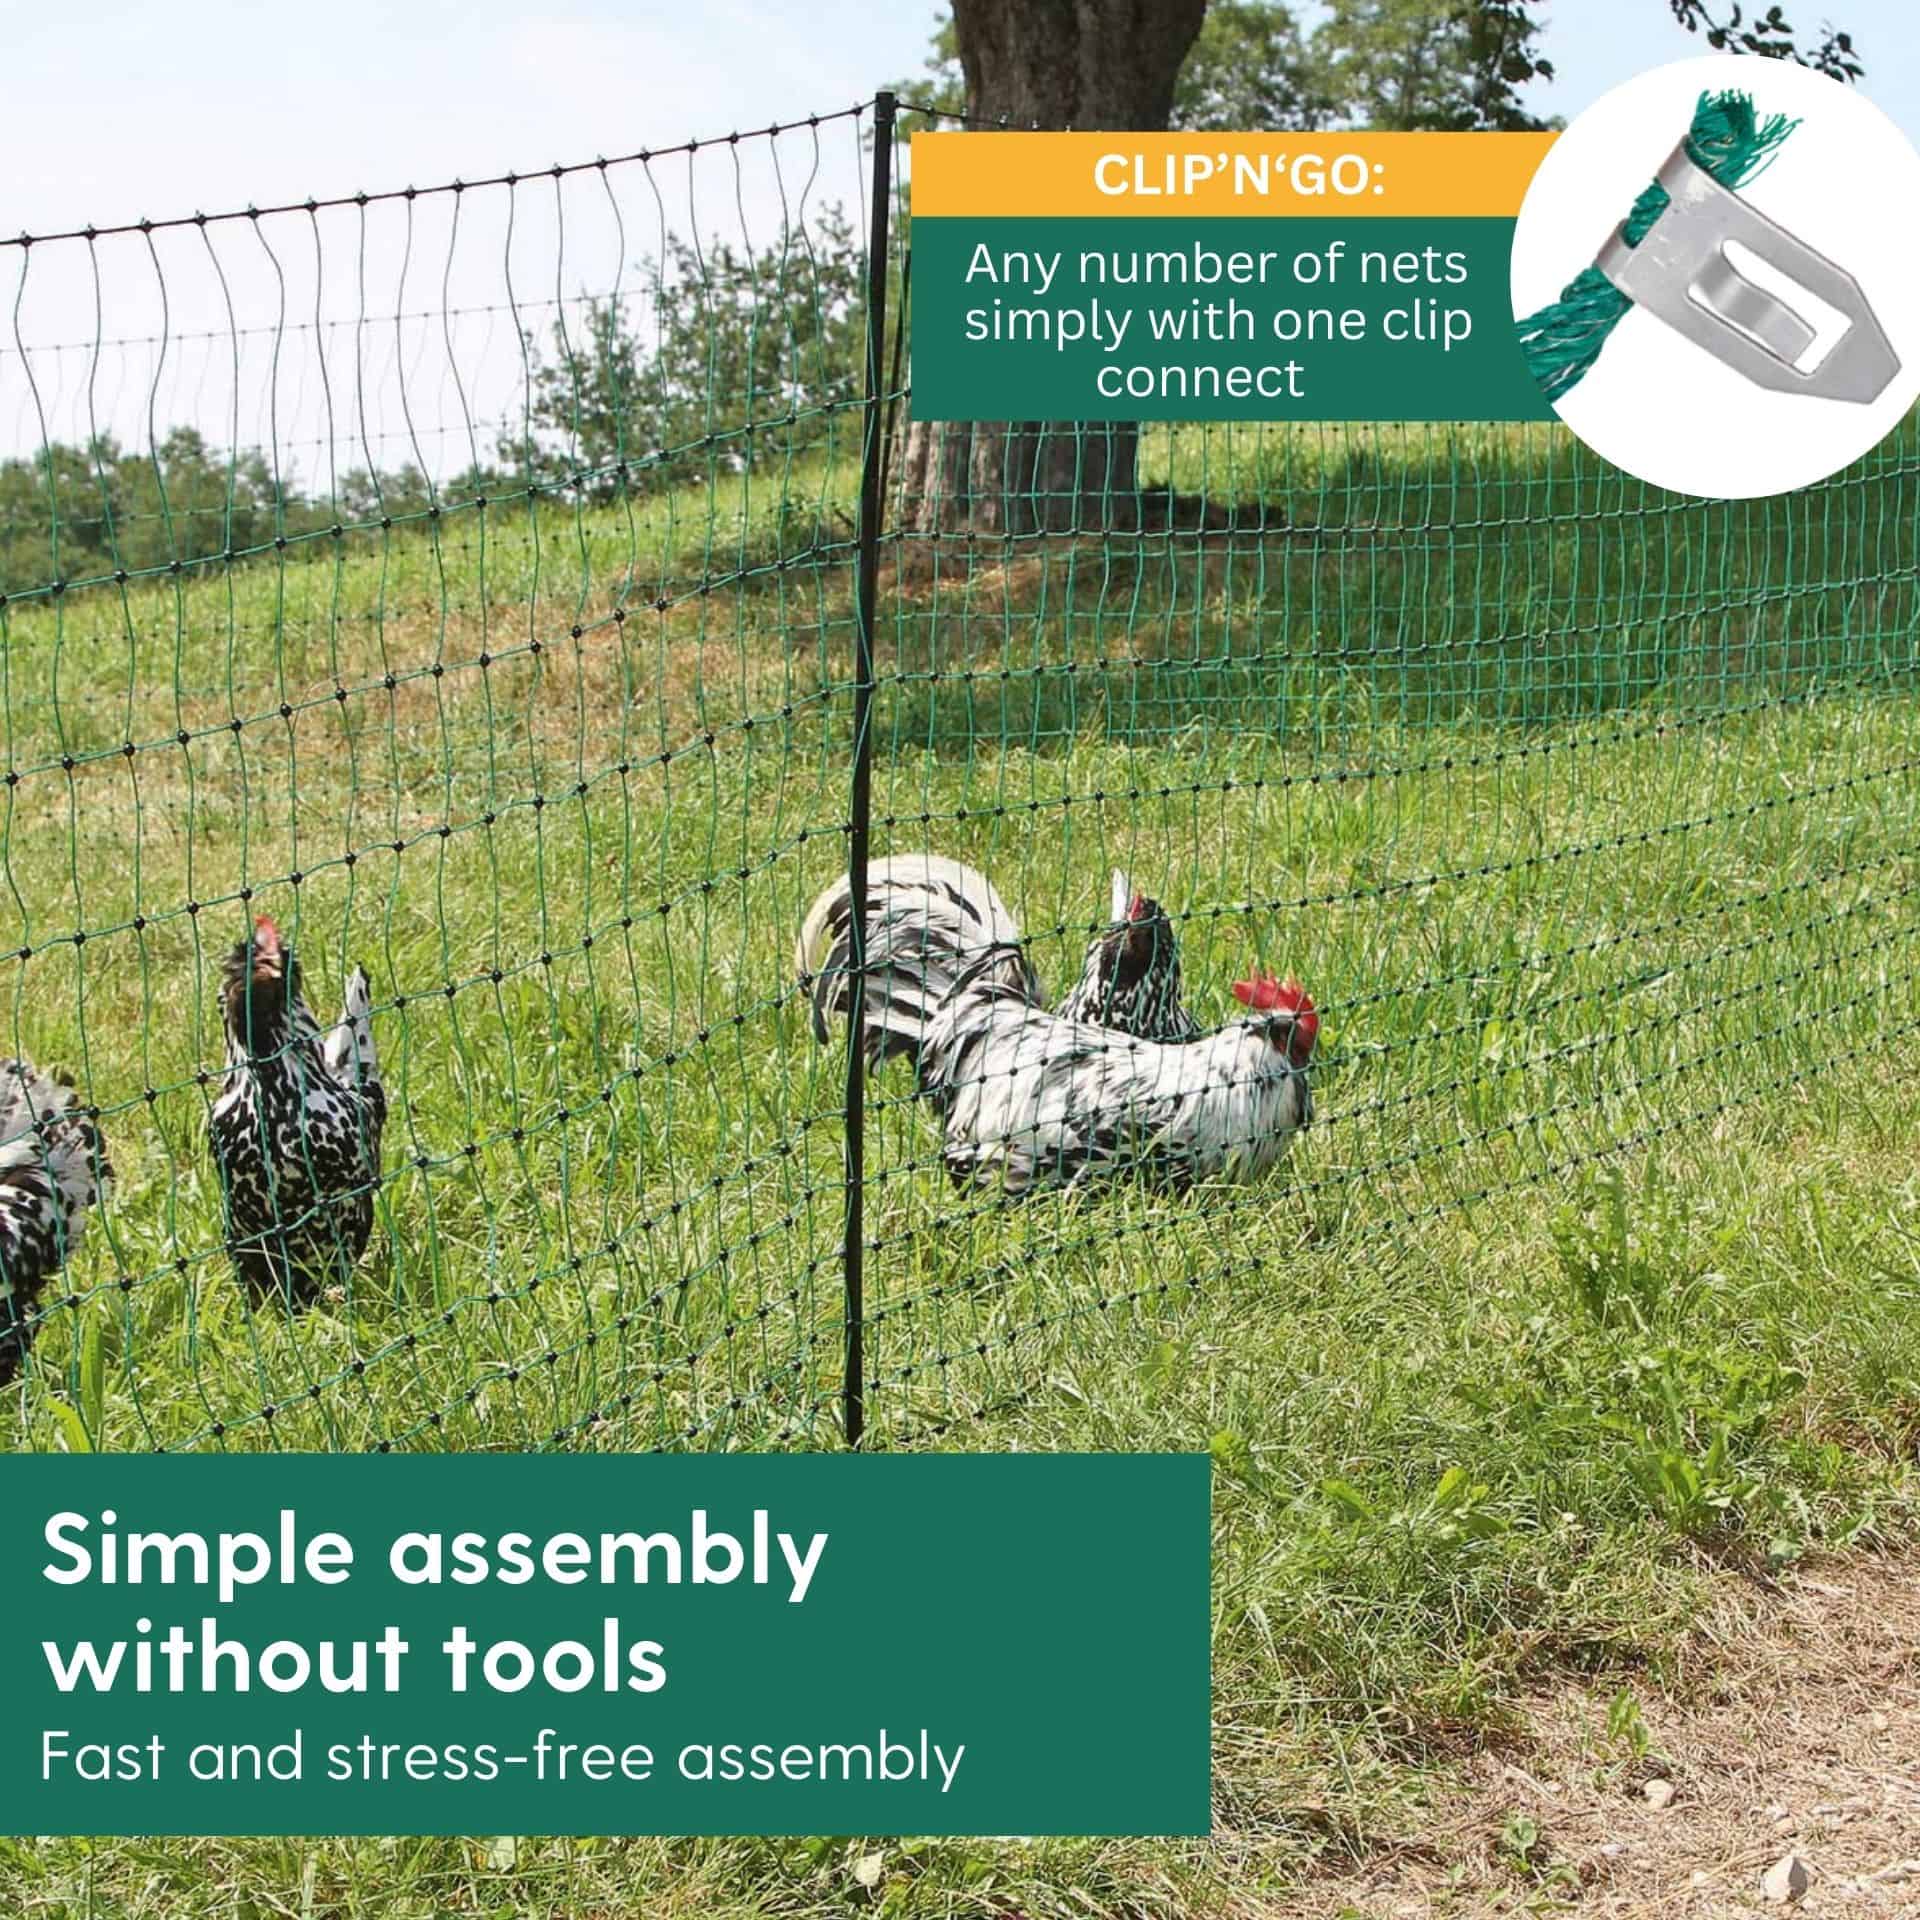 Agrarzone Poultry Net Classic electrificable, double tip, green 15 m x 106 cm